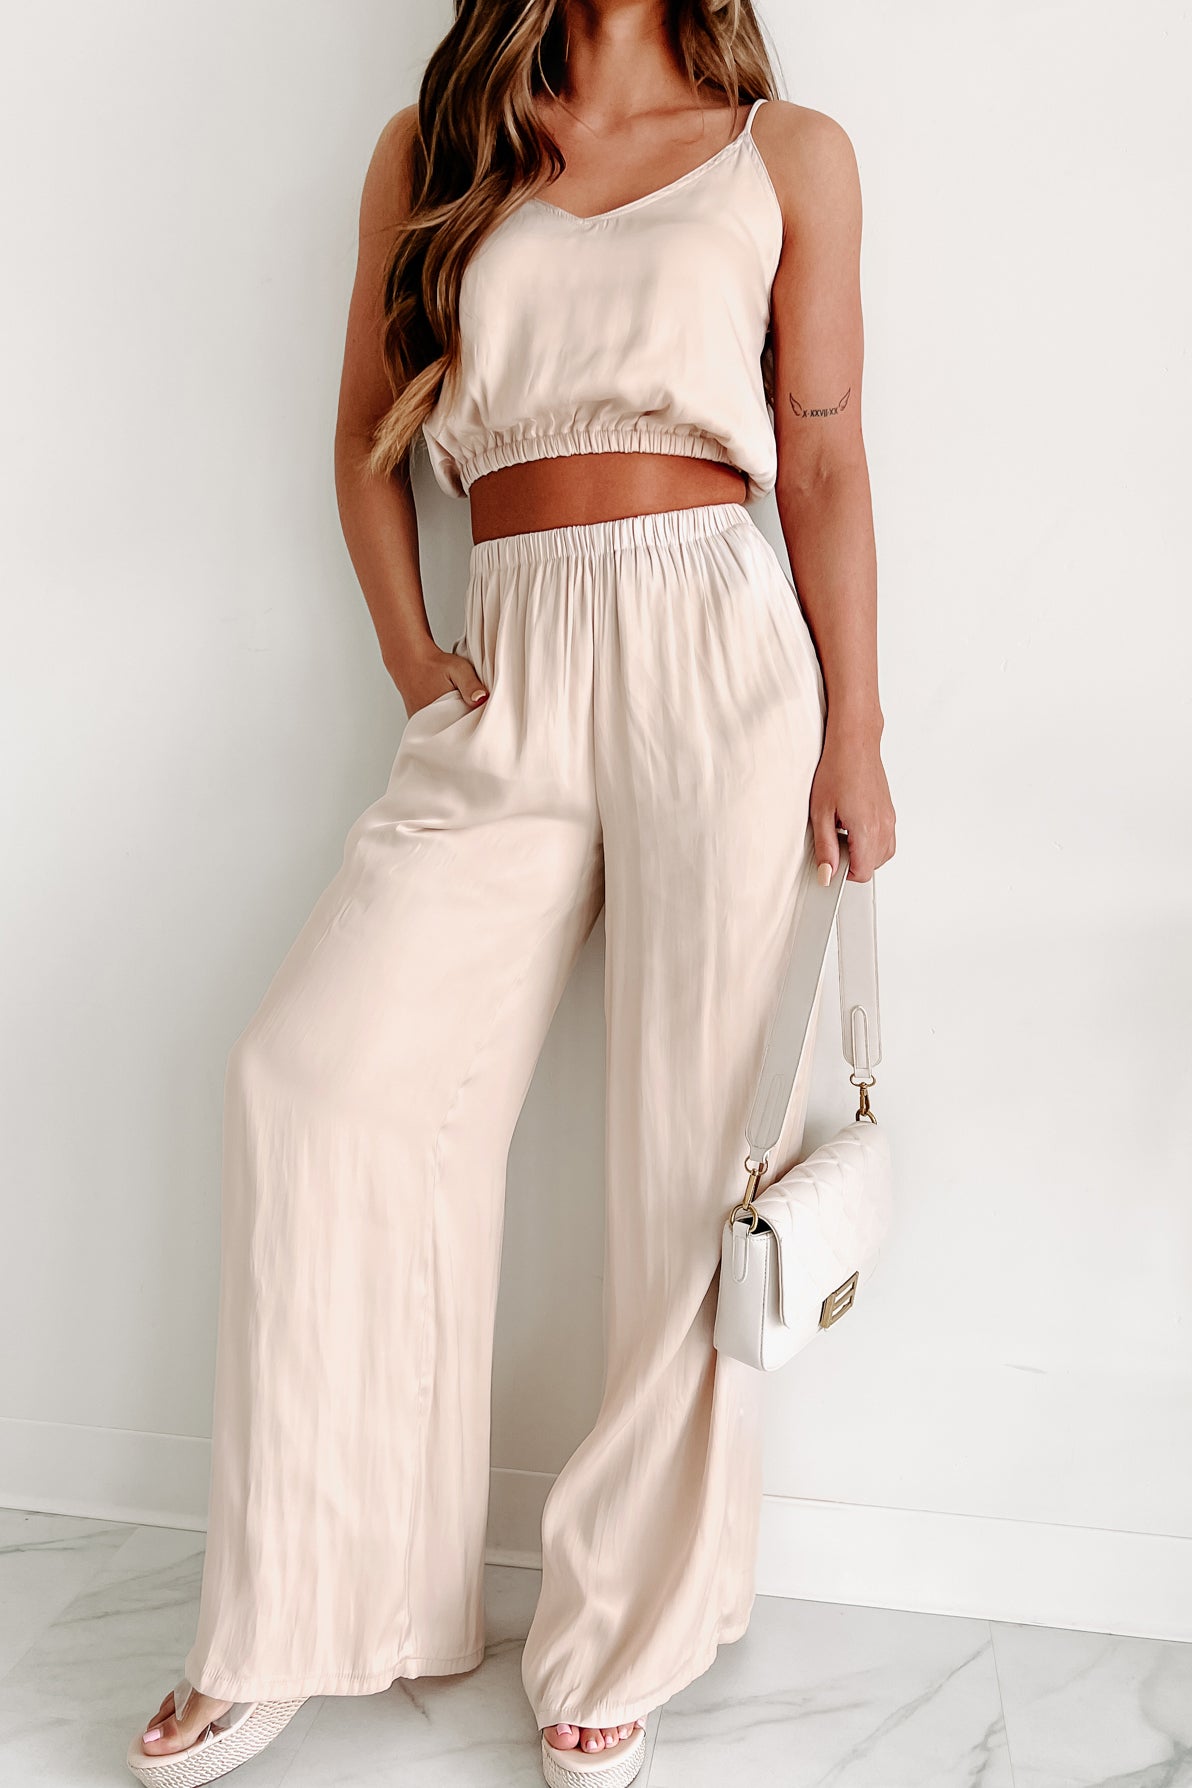 Luxe Satin Short Sleeved Two Piece Trouser Set  omgfashioncom